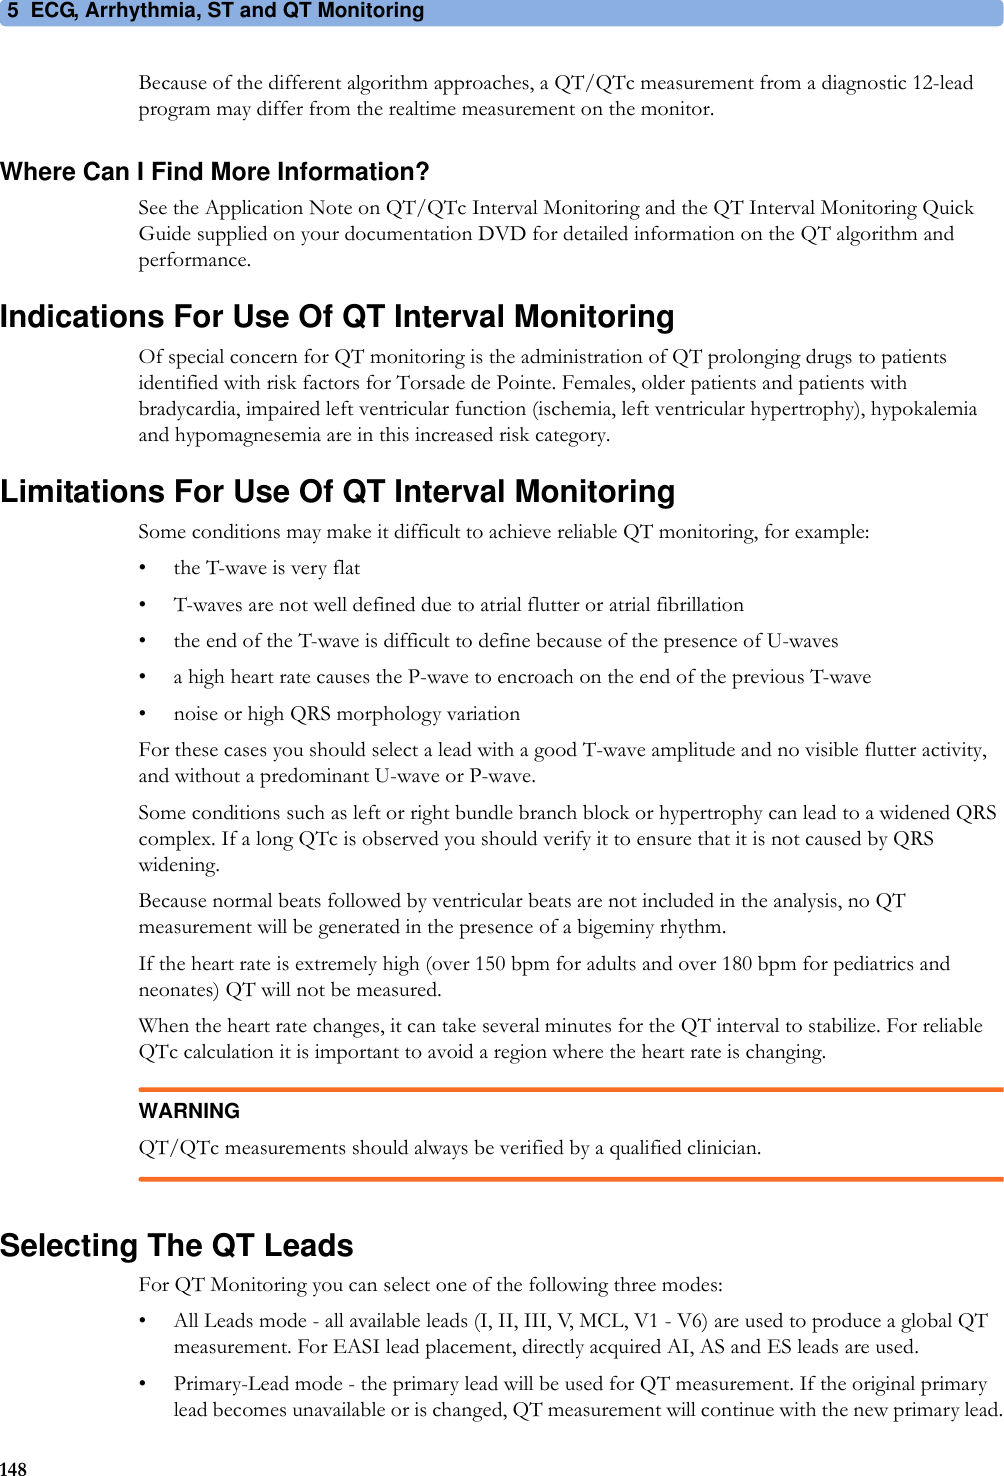 5 ECG, Arrhythmia, ST and QT Monitoring148Because of the different algorithm approaches, a QT/QTc measurement from a diagnostic 12-lead program may differ from the realtime measurement on the monitor.Where Can I Find More Information?See the Application Note on QT/QTc Interval Monitoring and the QT Interval Monitoring Quick Guide supplied on your documentation DVD for detailed information on the QT algorithm and performance.Indications For Use Of QT Interval MonitoringOf special concern for QT monitoring is the administration of QT prolonging drugs to patients identified with risk factors for Torsade de Pointe. Females, older patients and patients with bradycardia, impaired left ventricular function (ischemia, left ventricular hypertrophy), hypokalemia and hypomagnesemia are in this increased risk category.Limitations For Use Of QT Interval MonitoringSome conditions may make it difficult to achieve reliable QT monitoring, for example:• the T-wave is very flat• T-waves are not well defined due to atrial flutter or atrial fibrillation• the end of the T-wave is difficult to define because of the presence of U-waves• a high heart rate causes the P-wave to encroach on the end of the previous T-wave• noise or high QRS morphology variationFor these cases you should select a lead with a good T-wave amplitude and no visible flutter activity, and without a predominant U-wave or P-wave.Some conditions such as left or right bundle branch block or hypertrophy can lead to a widened QRS complex. If a long QTc is observed you should verify it to ensure that it is not caused by QRS widening.Because normal beats followed by ventricular beats are not included in the analysis, no QT measurement will be generated in the presence of a bigeminy rhythm.If the heart rate is extremely high (over 150 bpm for adults and over 180 bpm for pediatrics and neonates) QT will not be measured.When the heart rate changes, it can take several minutes for the QT interval to stabilize. For reliable QTc calculation it is important to avoid a region where the heart rate is changing.WARNINGQT/QTc measurements should always be verified by a qualified clinician.Selecting The QT LeadsFor QT Monitoring you can select one of the following three modes:• All Leads mode - all available leads (I, II, III, V, MCL, V1 - V6) are used to produce a global QT measurement. For EASI lead placement, directly acquired AI, AS and ES leads are used.• Primary-Lead mode - the primary lead will be used for QT measurement. If the original primary lead becomes unavailable or is changed, QT measurement will continue with the new primary lead.